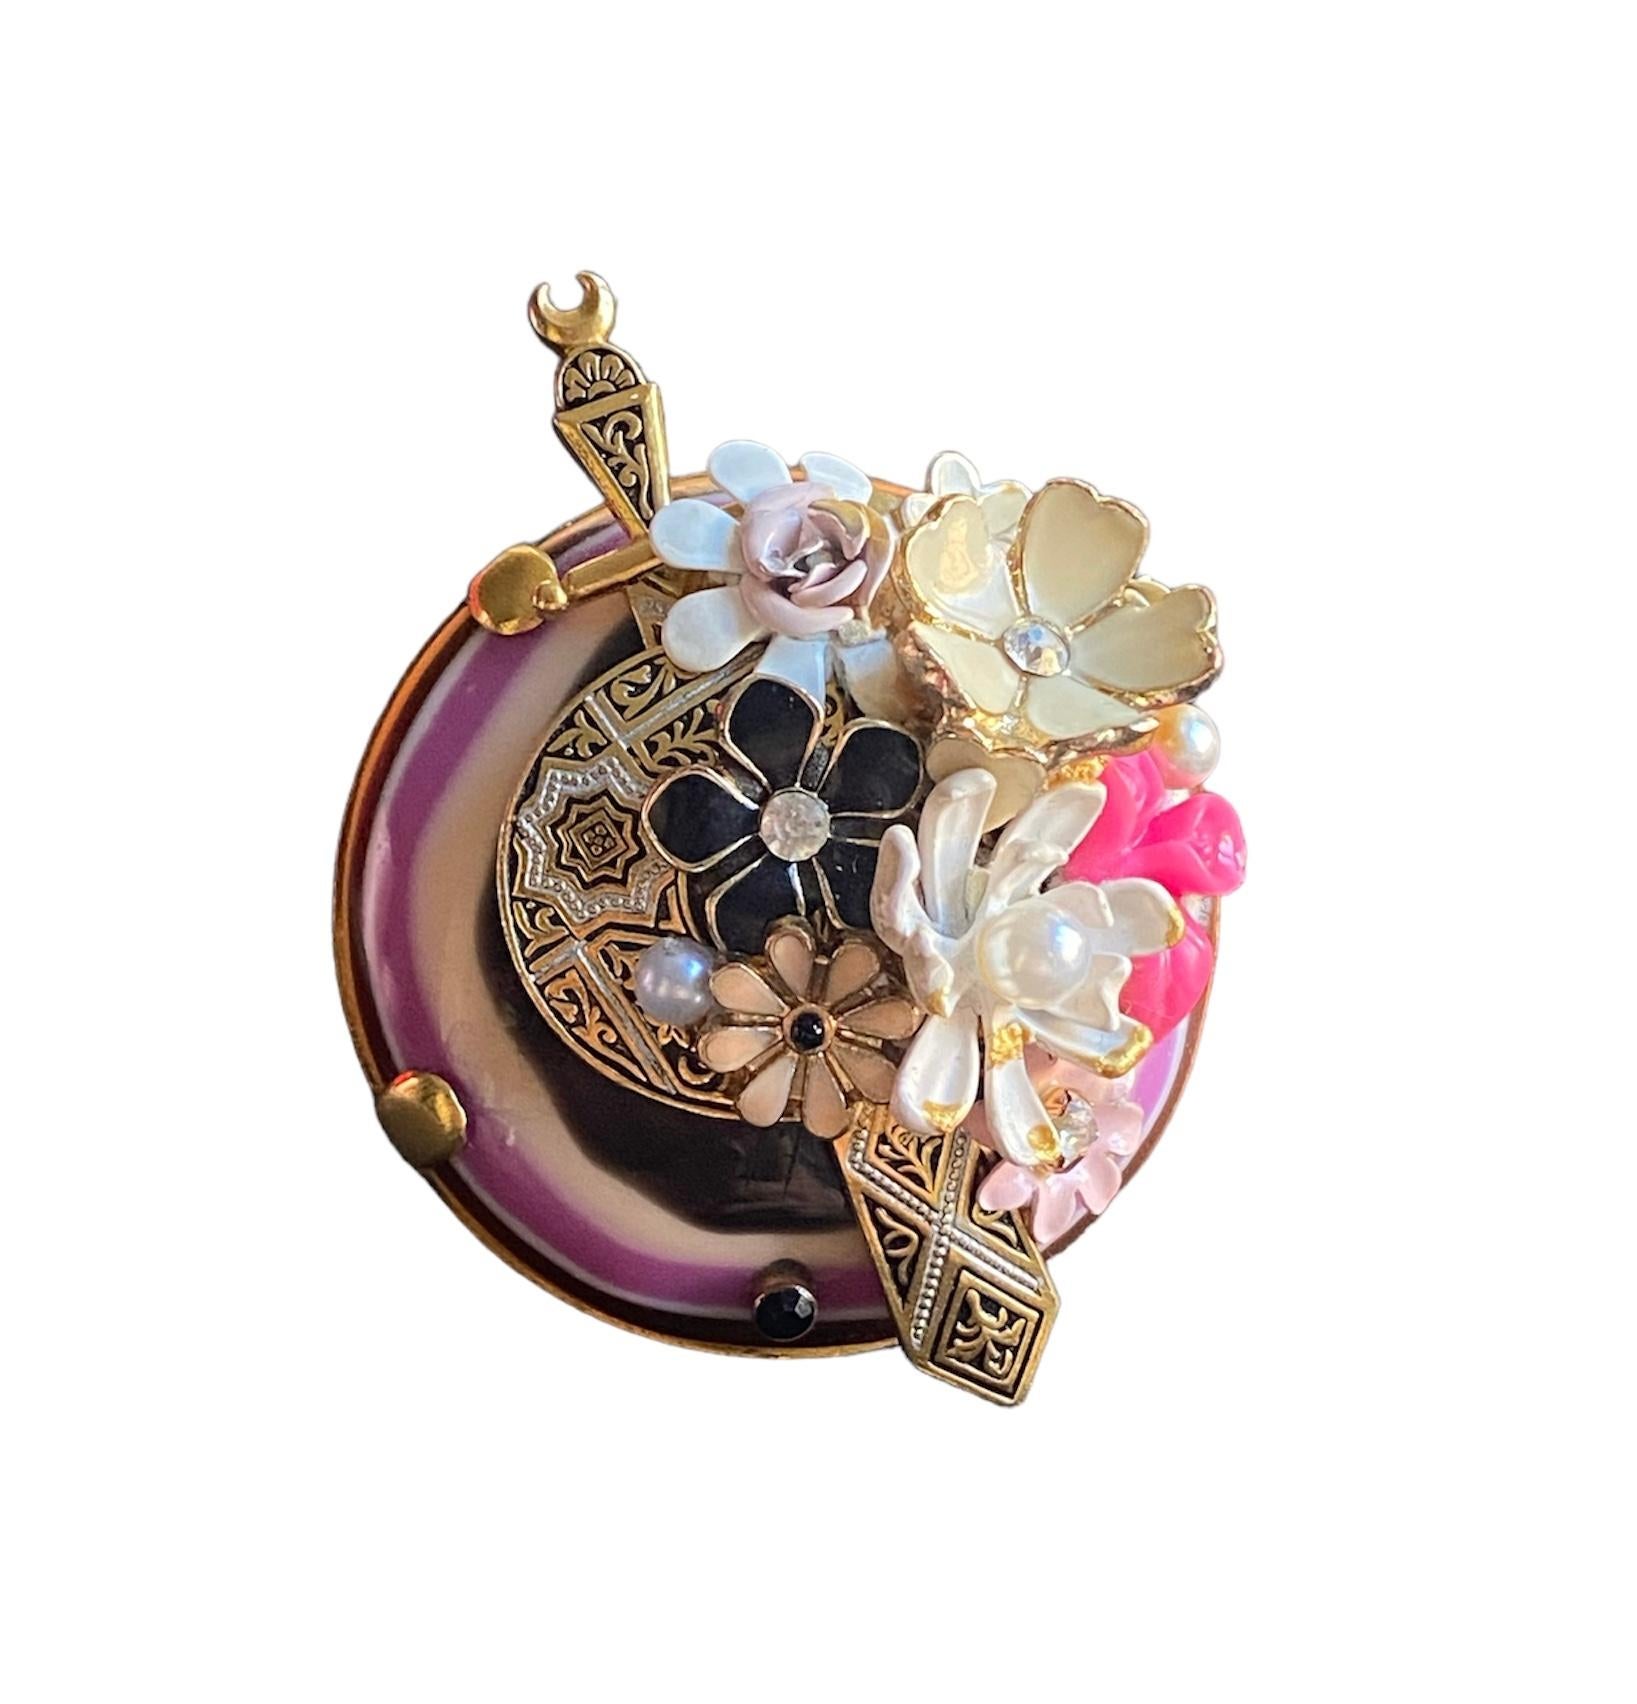 This is a unique piece created for Ludmila Navarro, fine artist & jewellery designer. A totally handmade jewel which it was created from a sustainable process during which she recovers and improves several antique and vintage jewels and elements